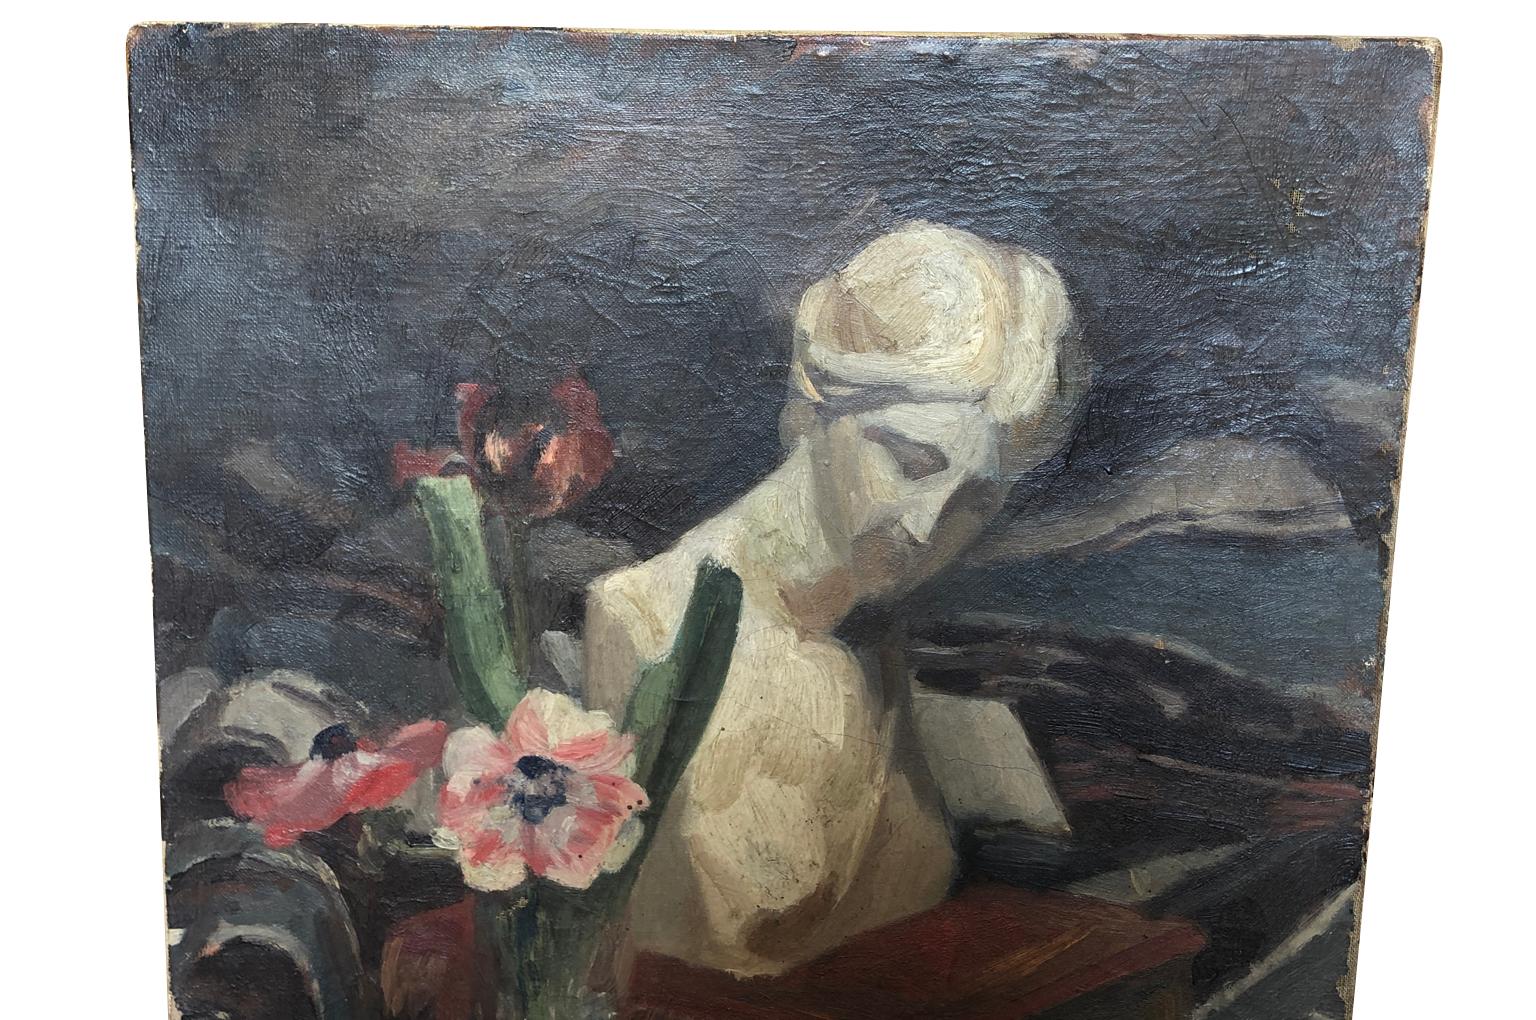 A very charming French early 20th century Nature Morte - Still Life. Oil on canvas, a wonderful grouping of a bust, flowers and books. Wonderful craquelure and brush work.